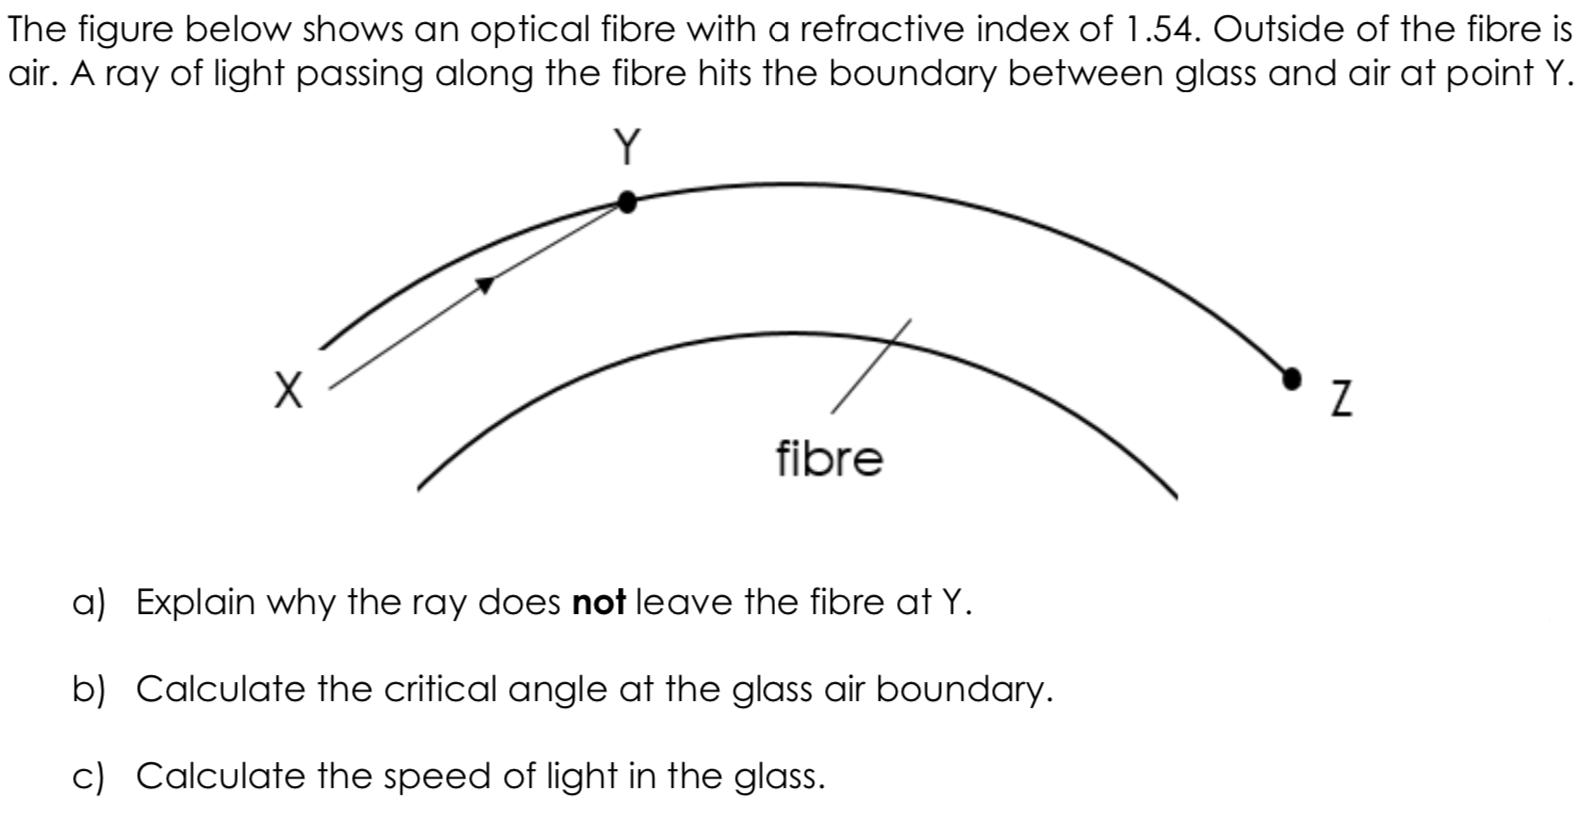 The figure below shows an optical fibre with a refractive index of 1.54. Outside of the fibre isair. A ray of light passing